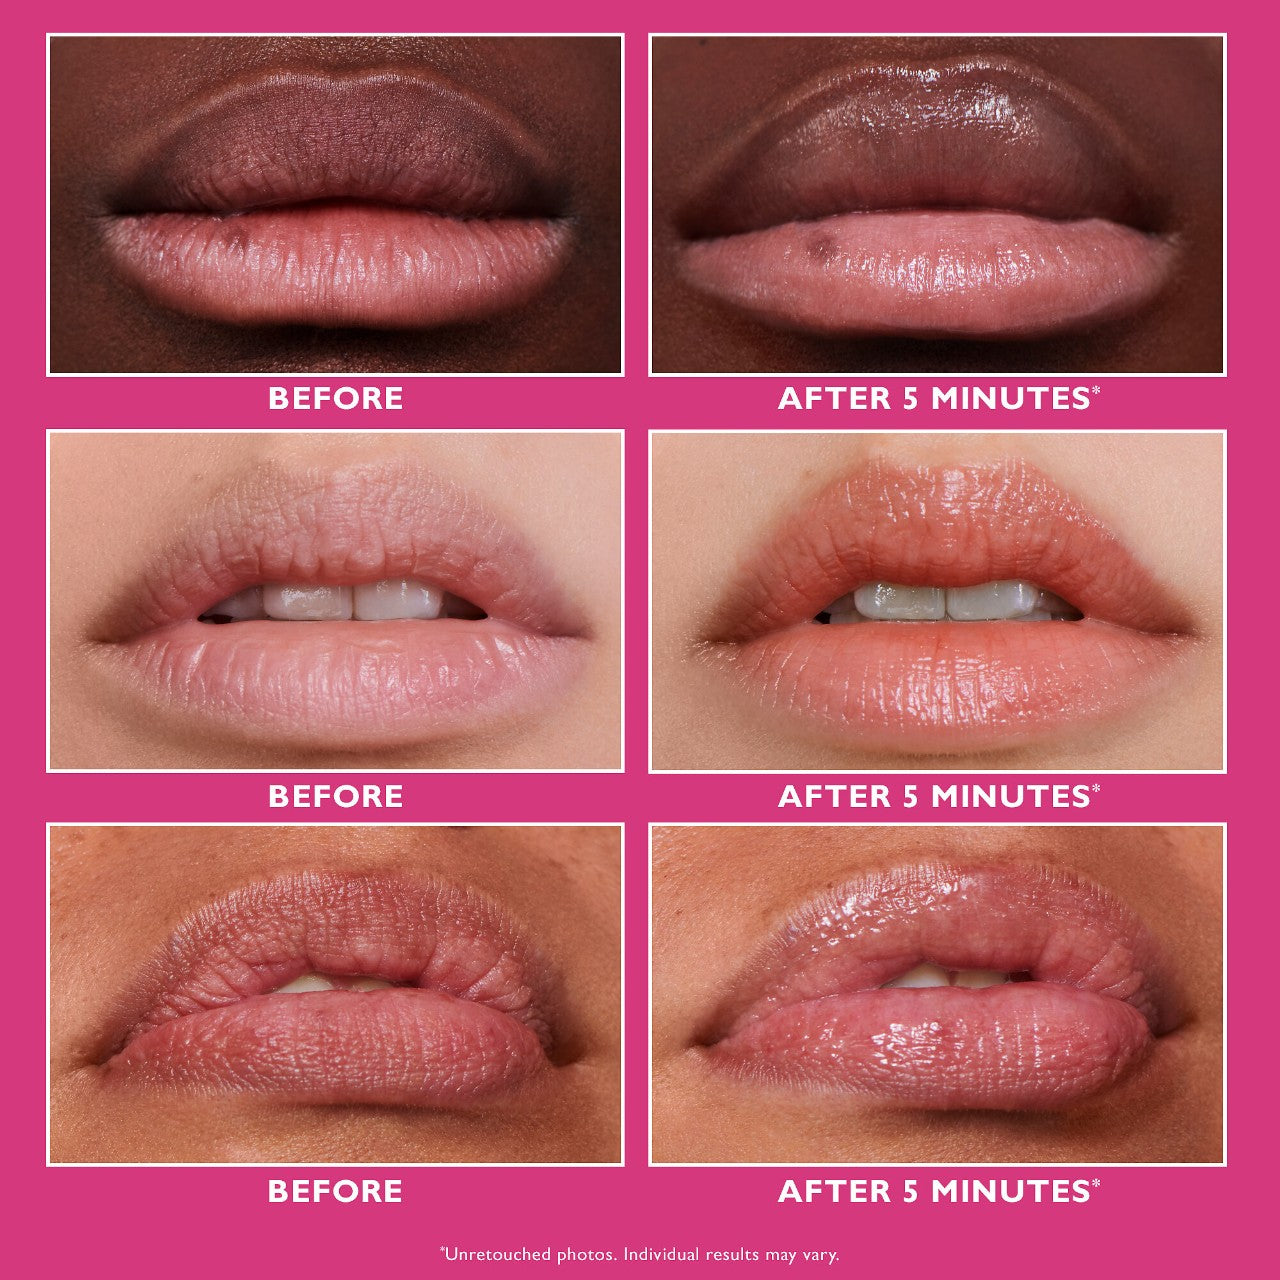 Peter Thomas Roth, Instant FIRMx Lip Filler